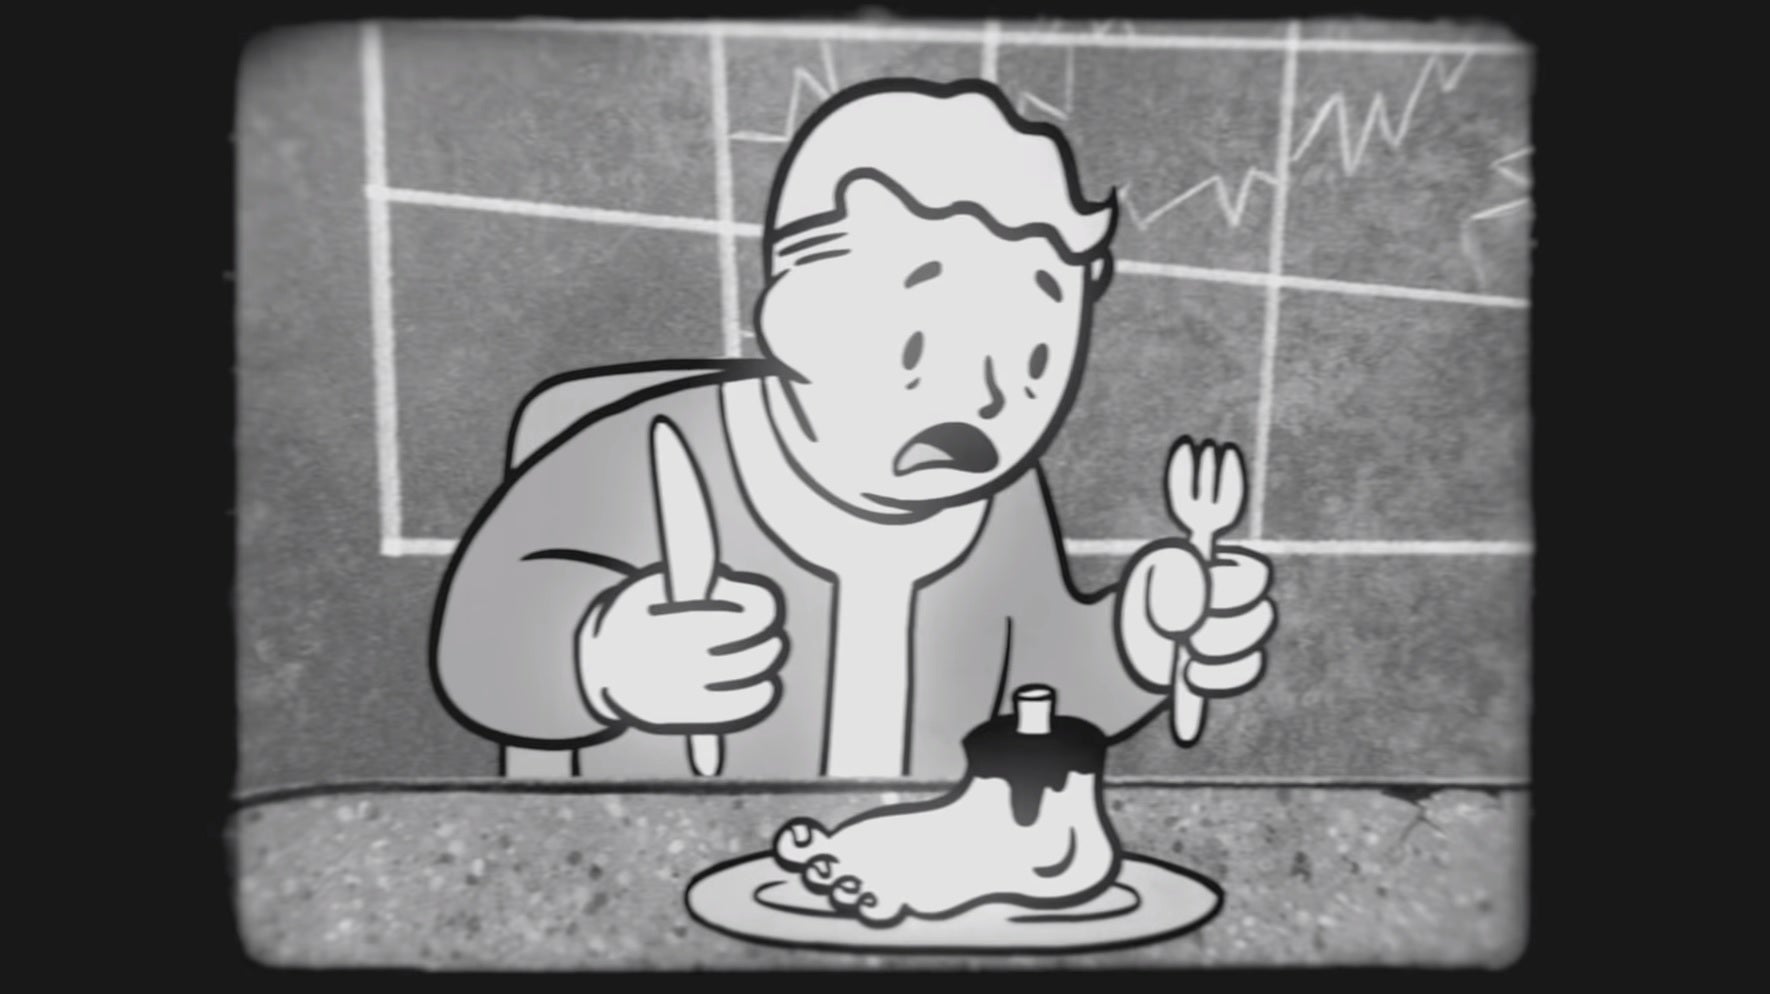 Fallout 3 speedrunning devours a baby in less than 20 minutes